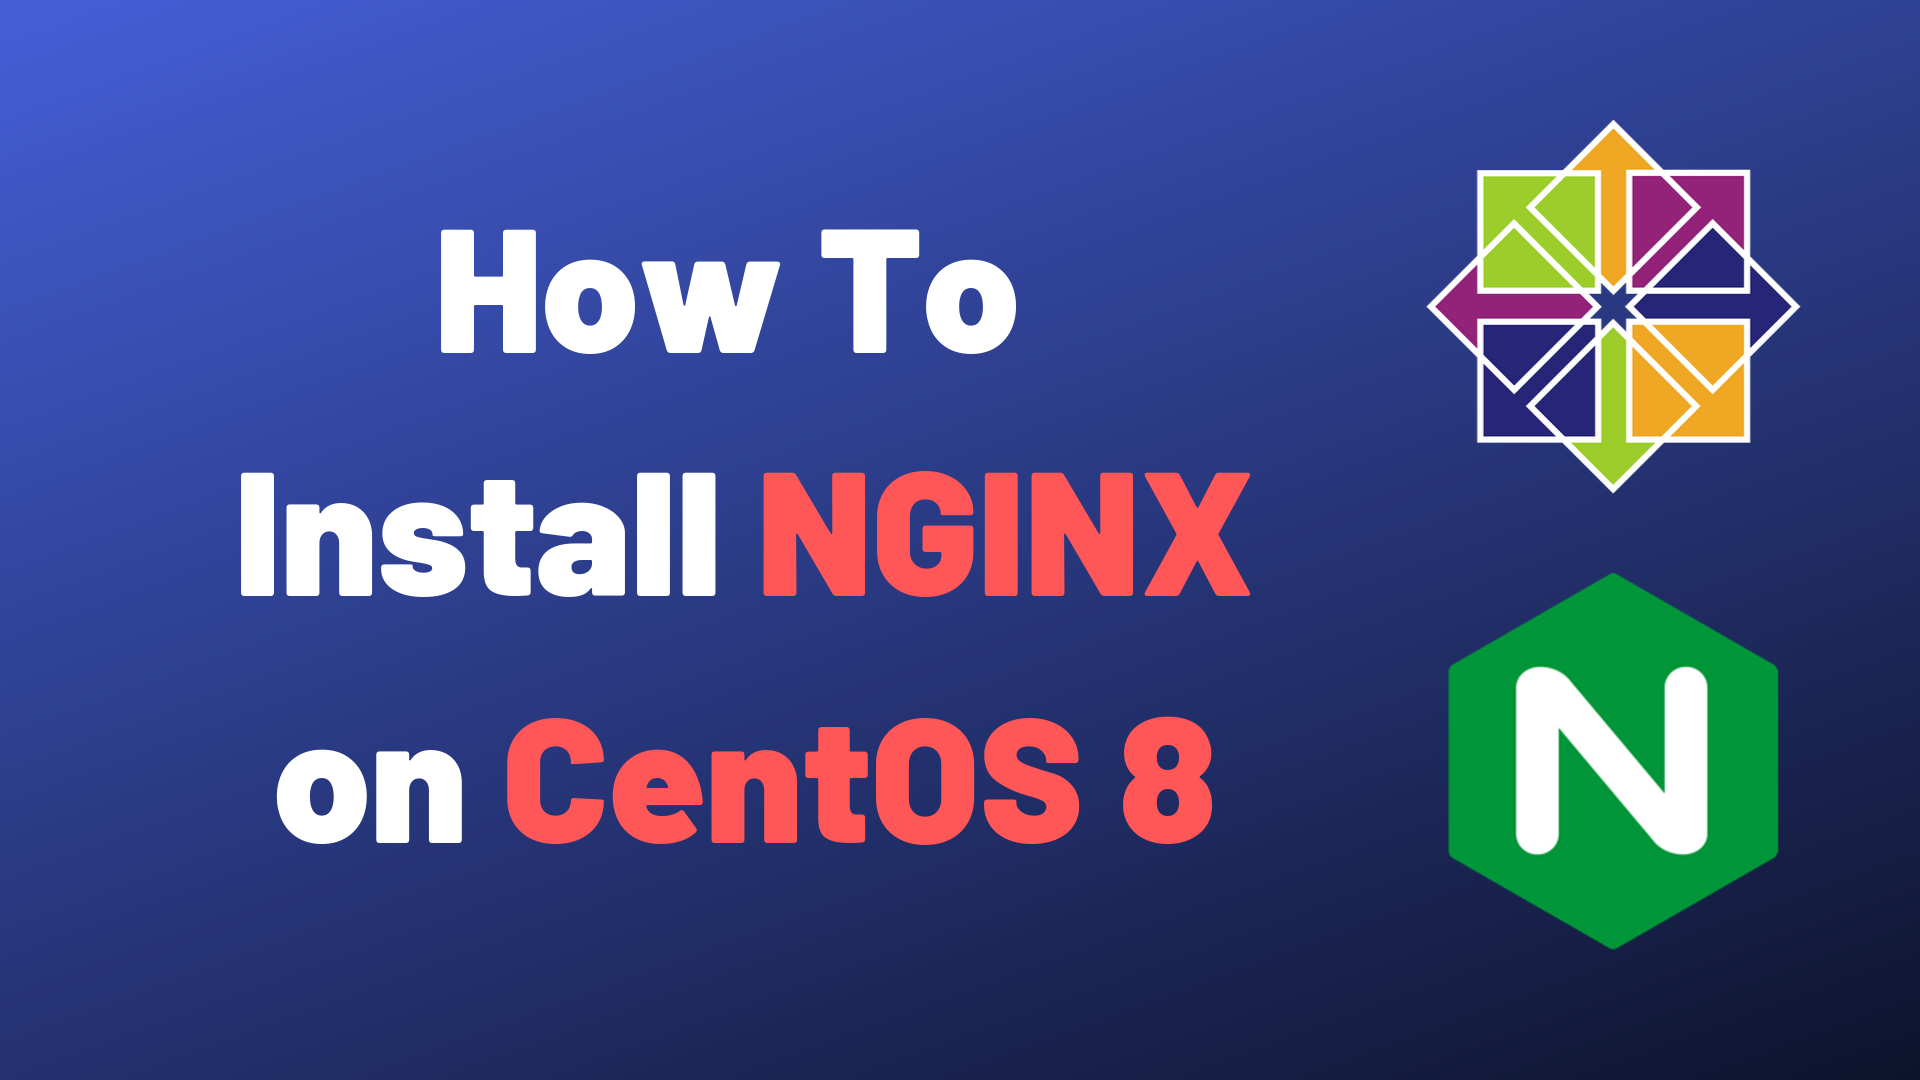 How To Install NGINX on CentOS 8